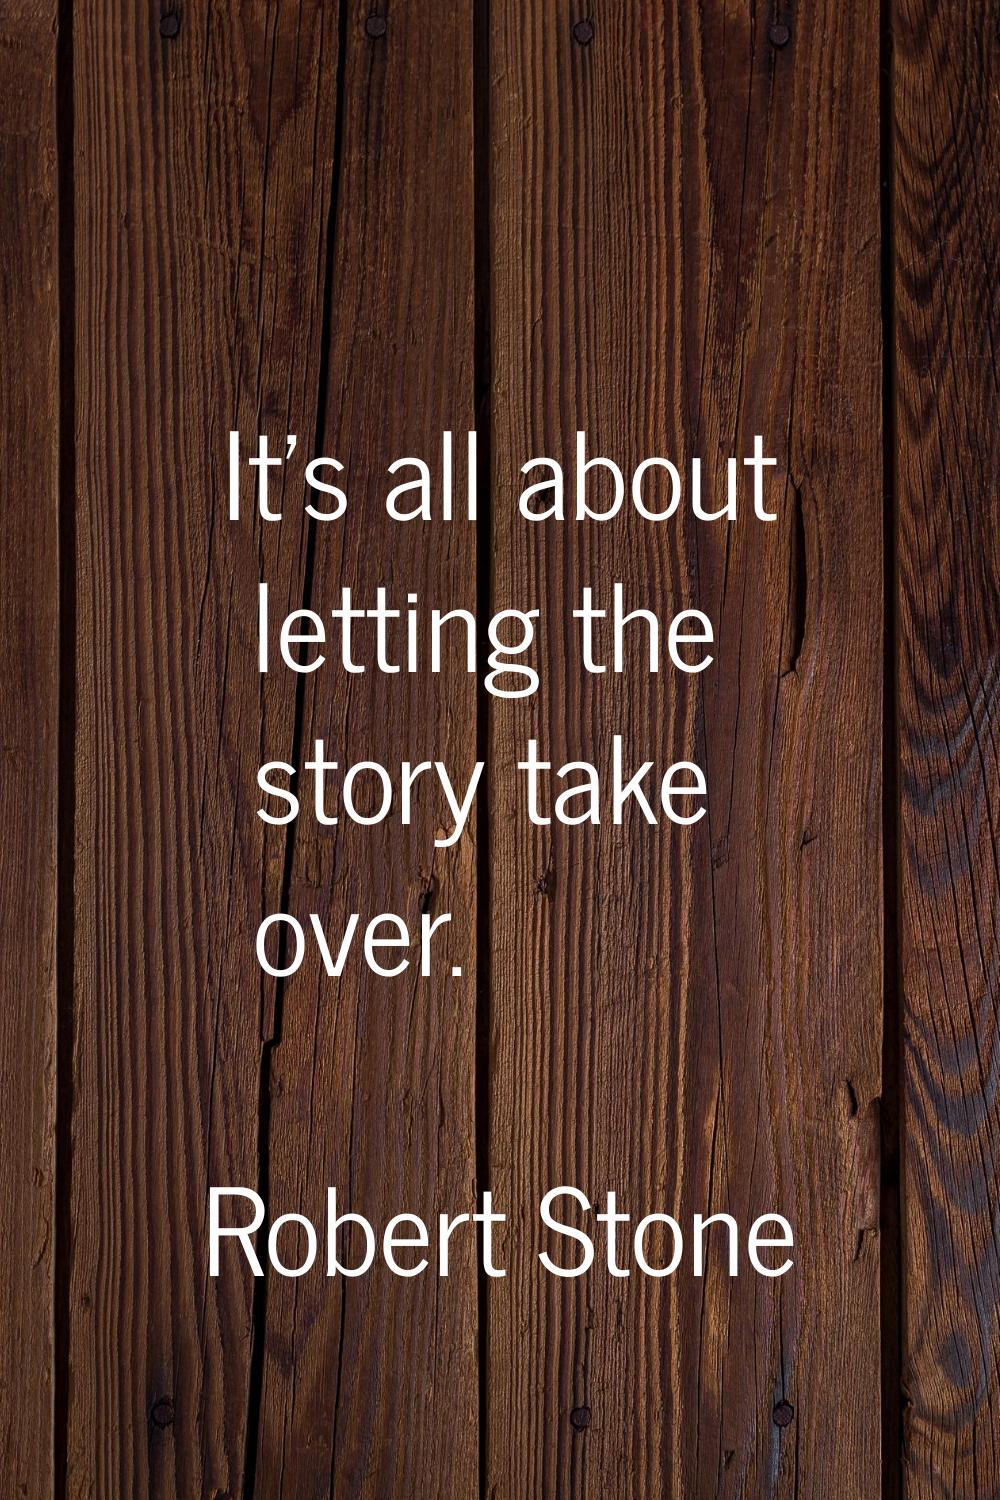 It's all about letting the story take over.